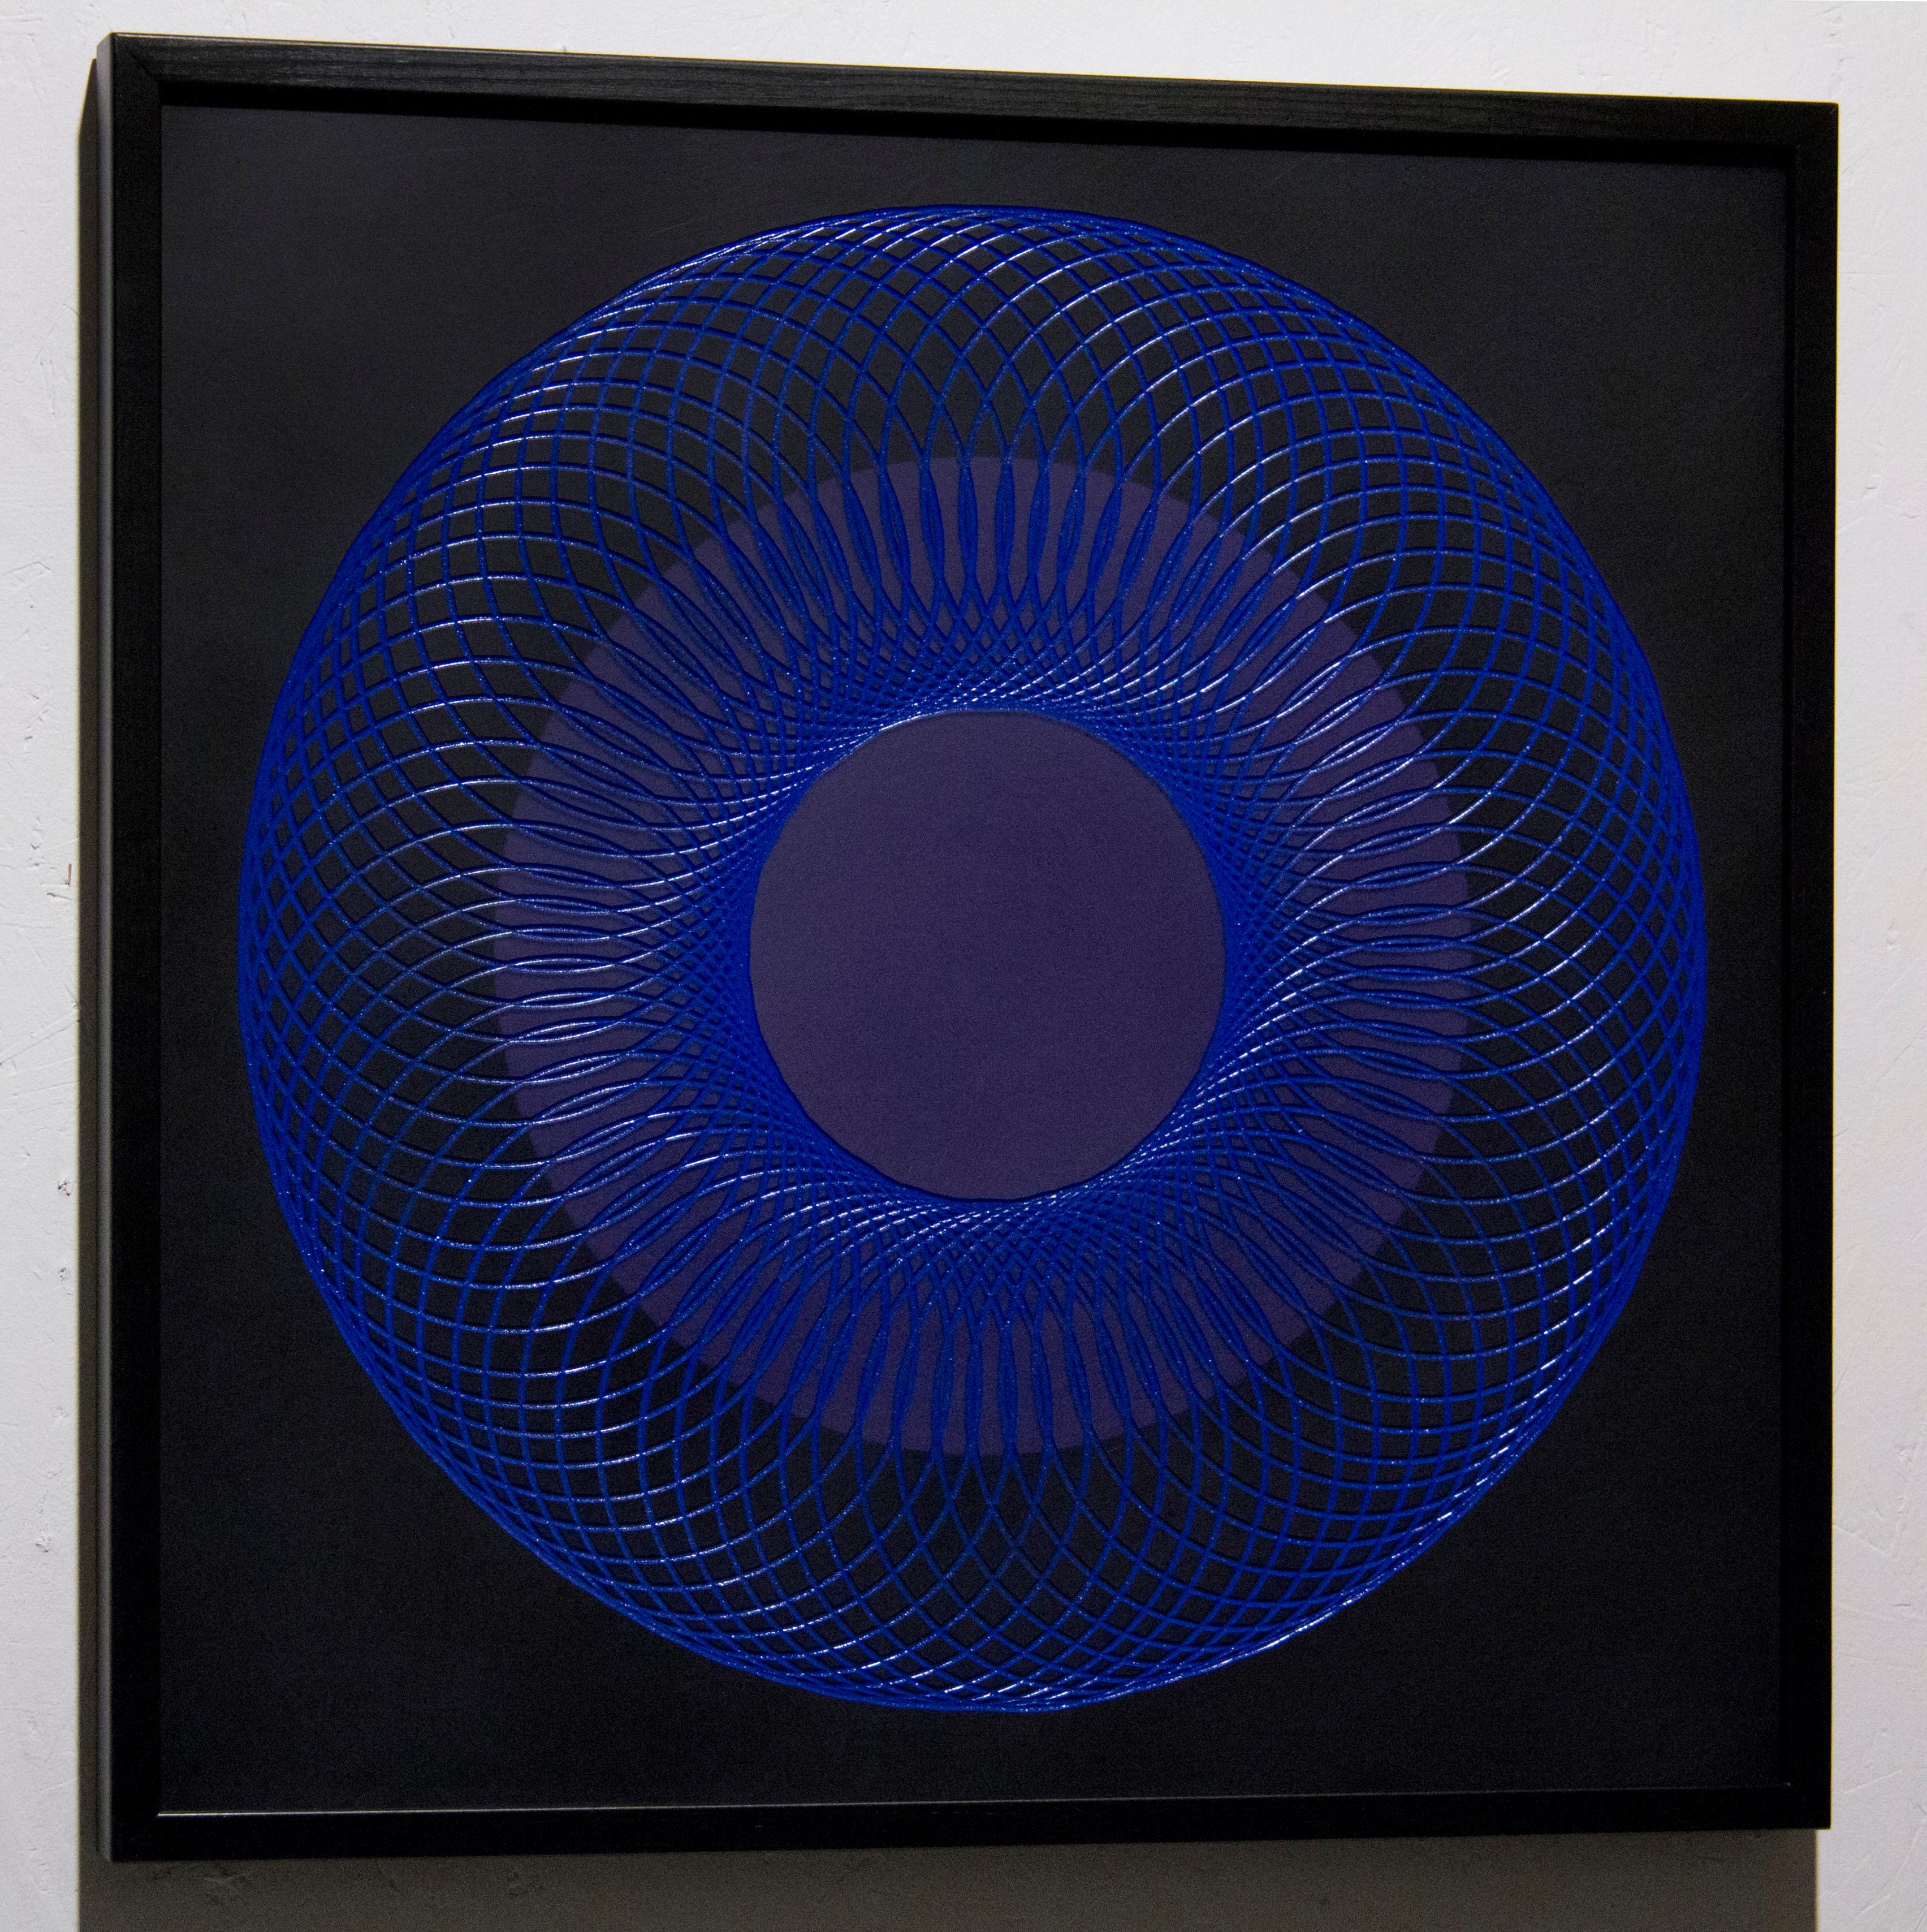 51905- blue circle abstract geometric holographic light drawing on wood panel - Painting by James Minden